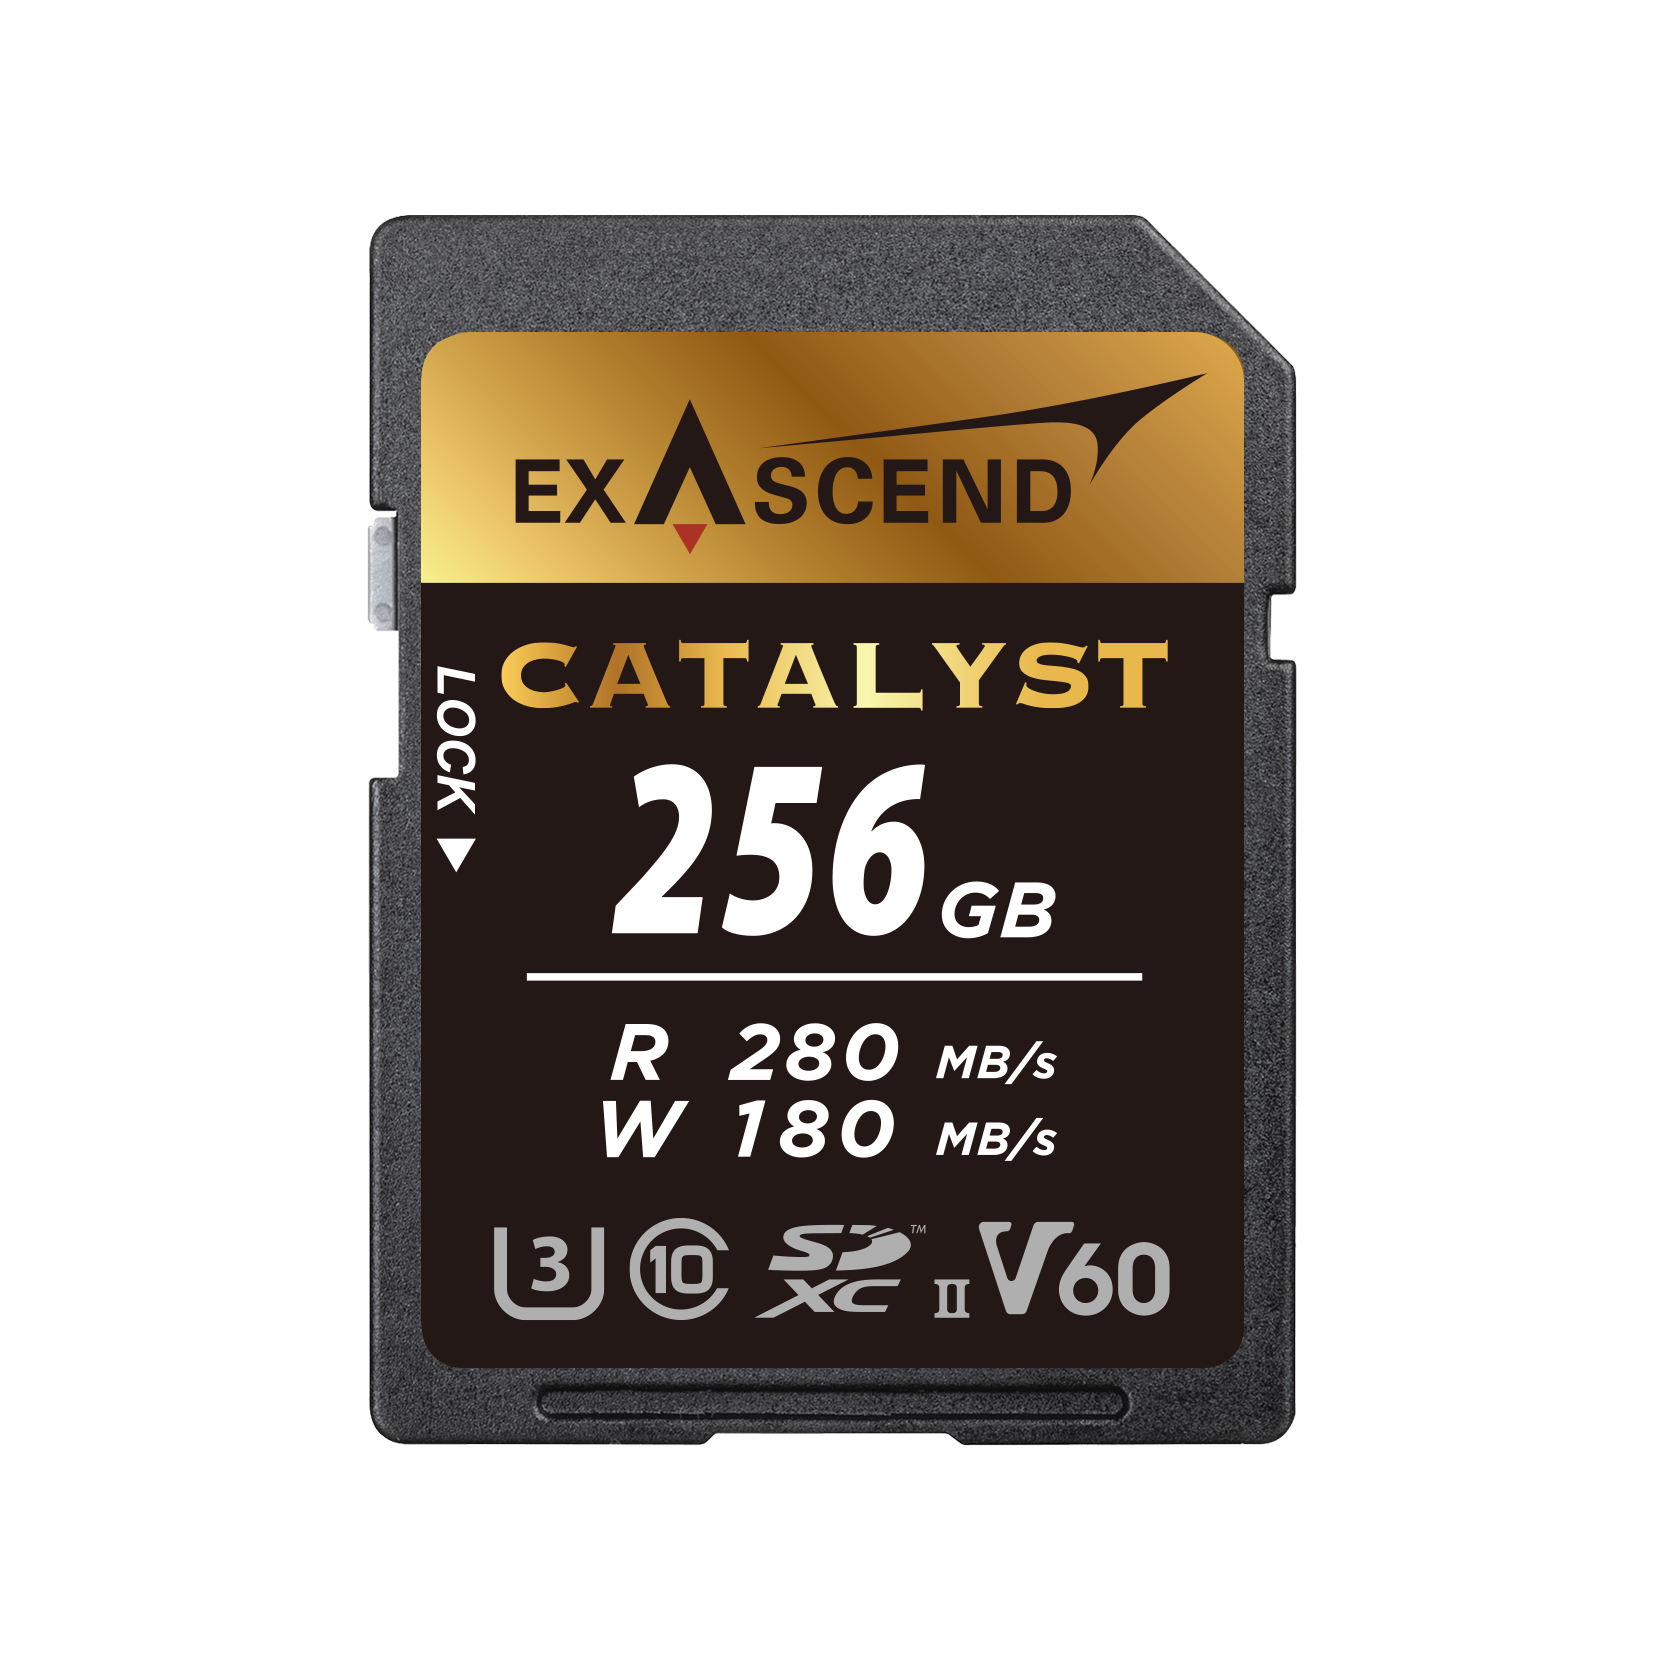 Catalyst V60 SD Card 256GB.png